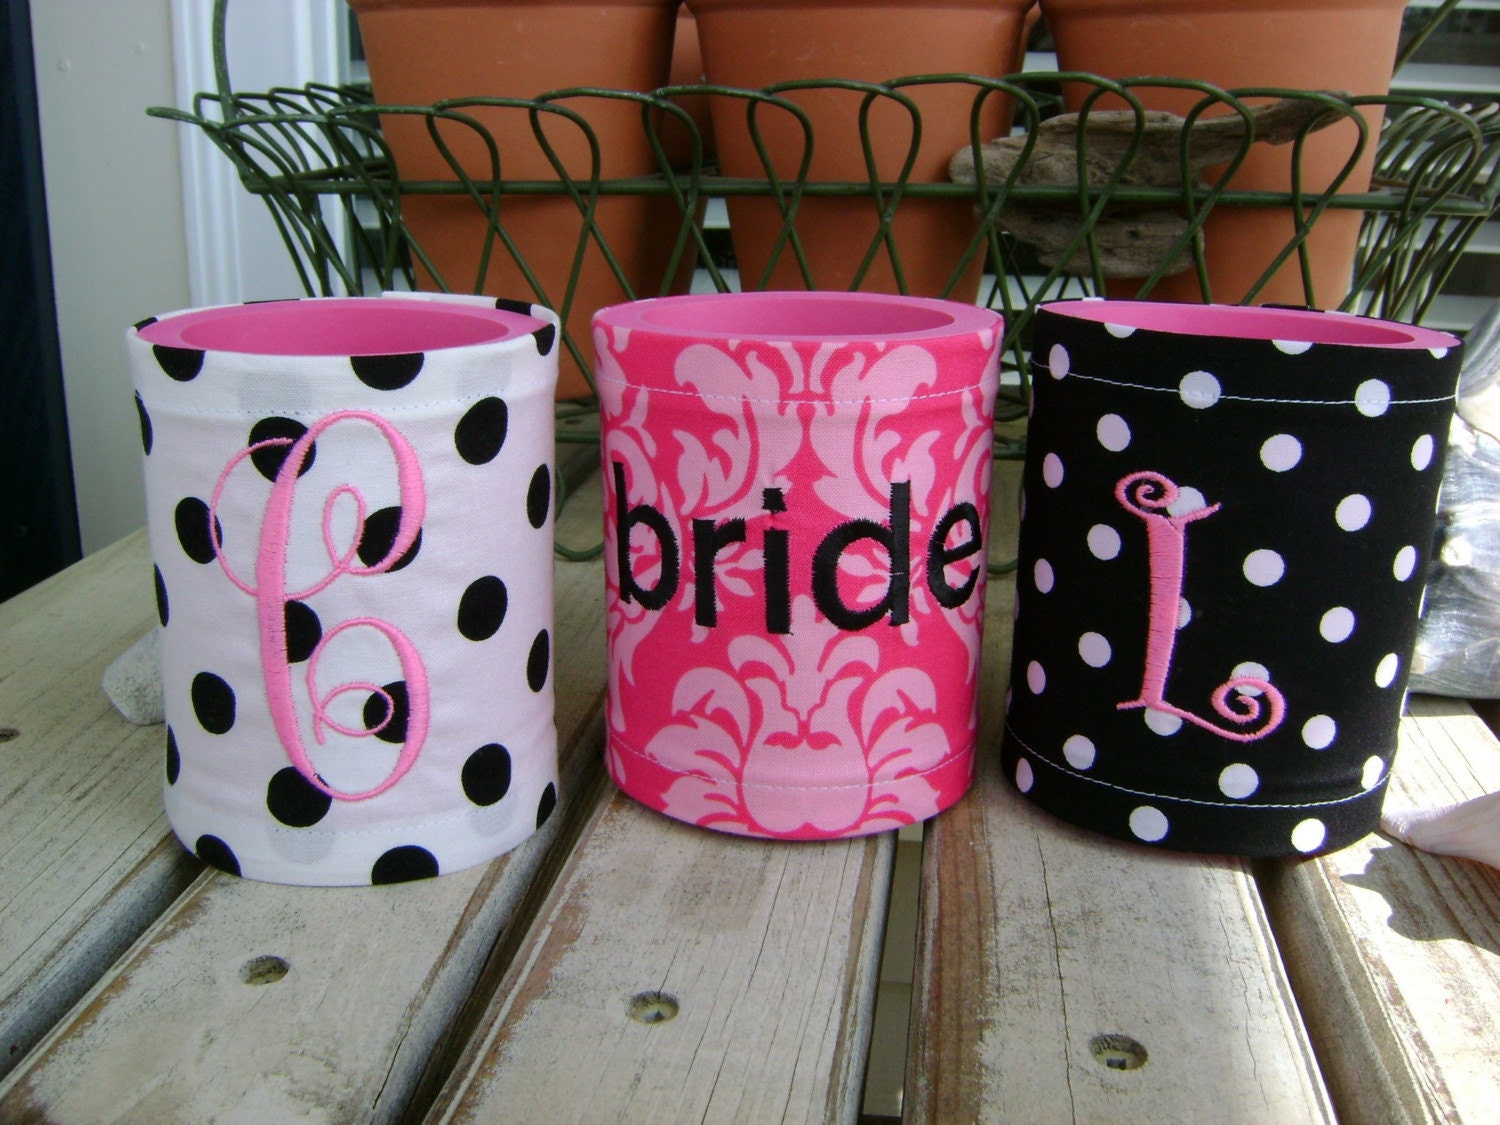  Wedding Party Gifts